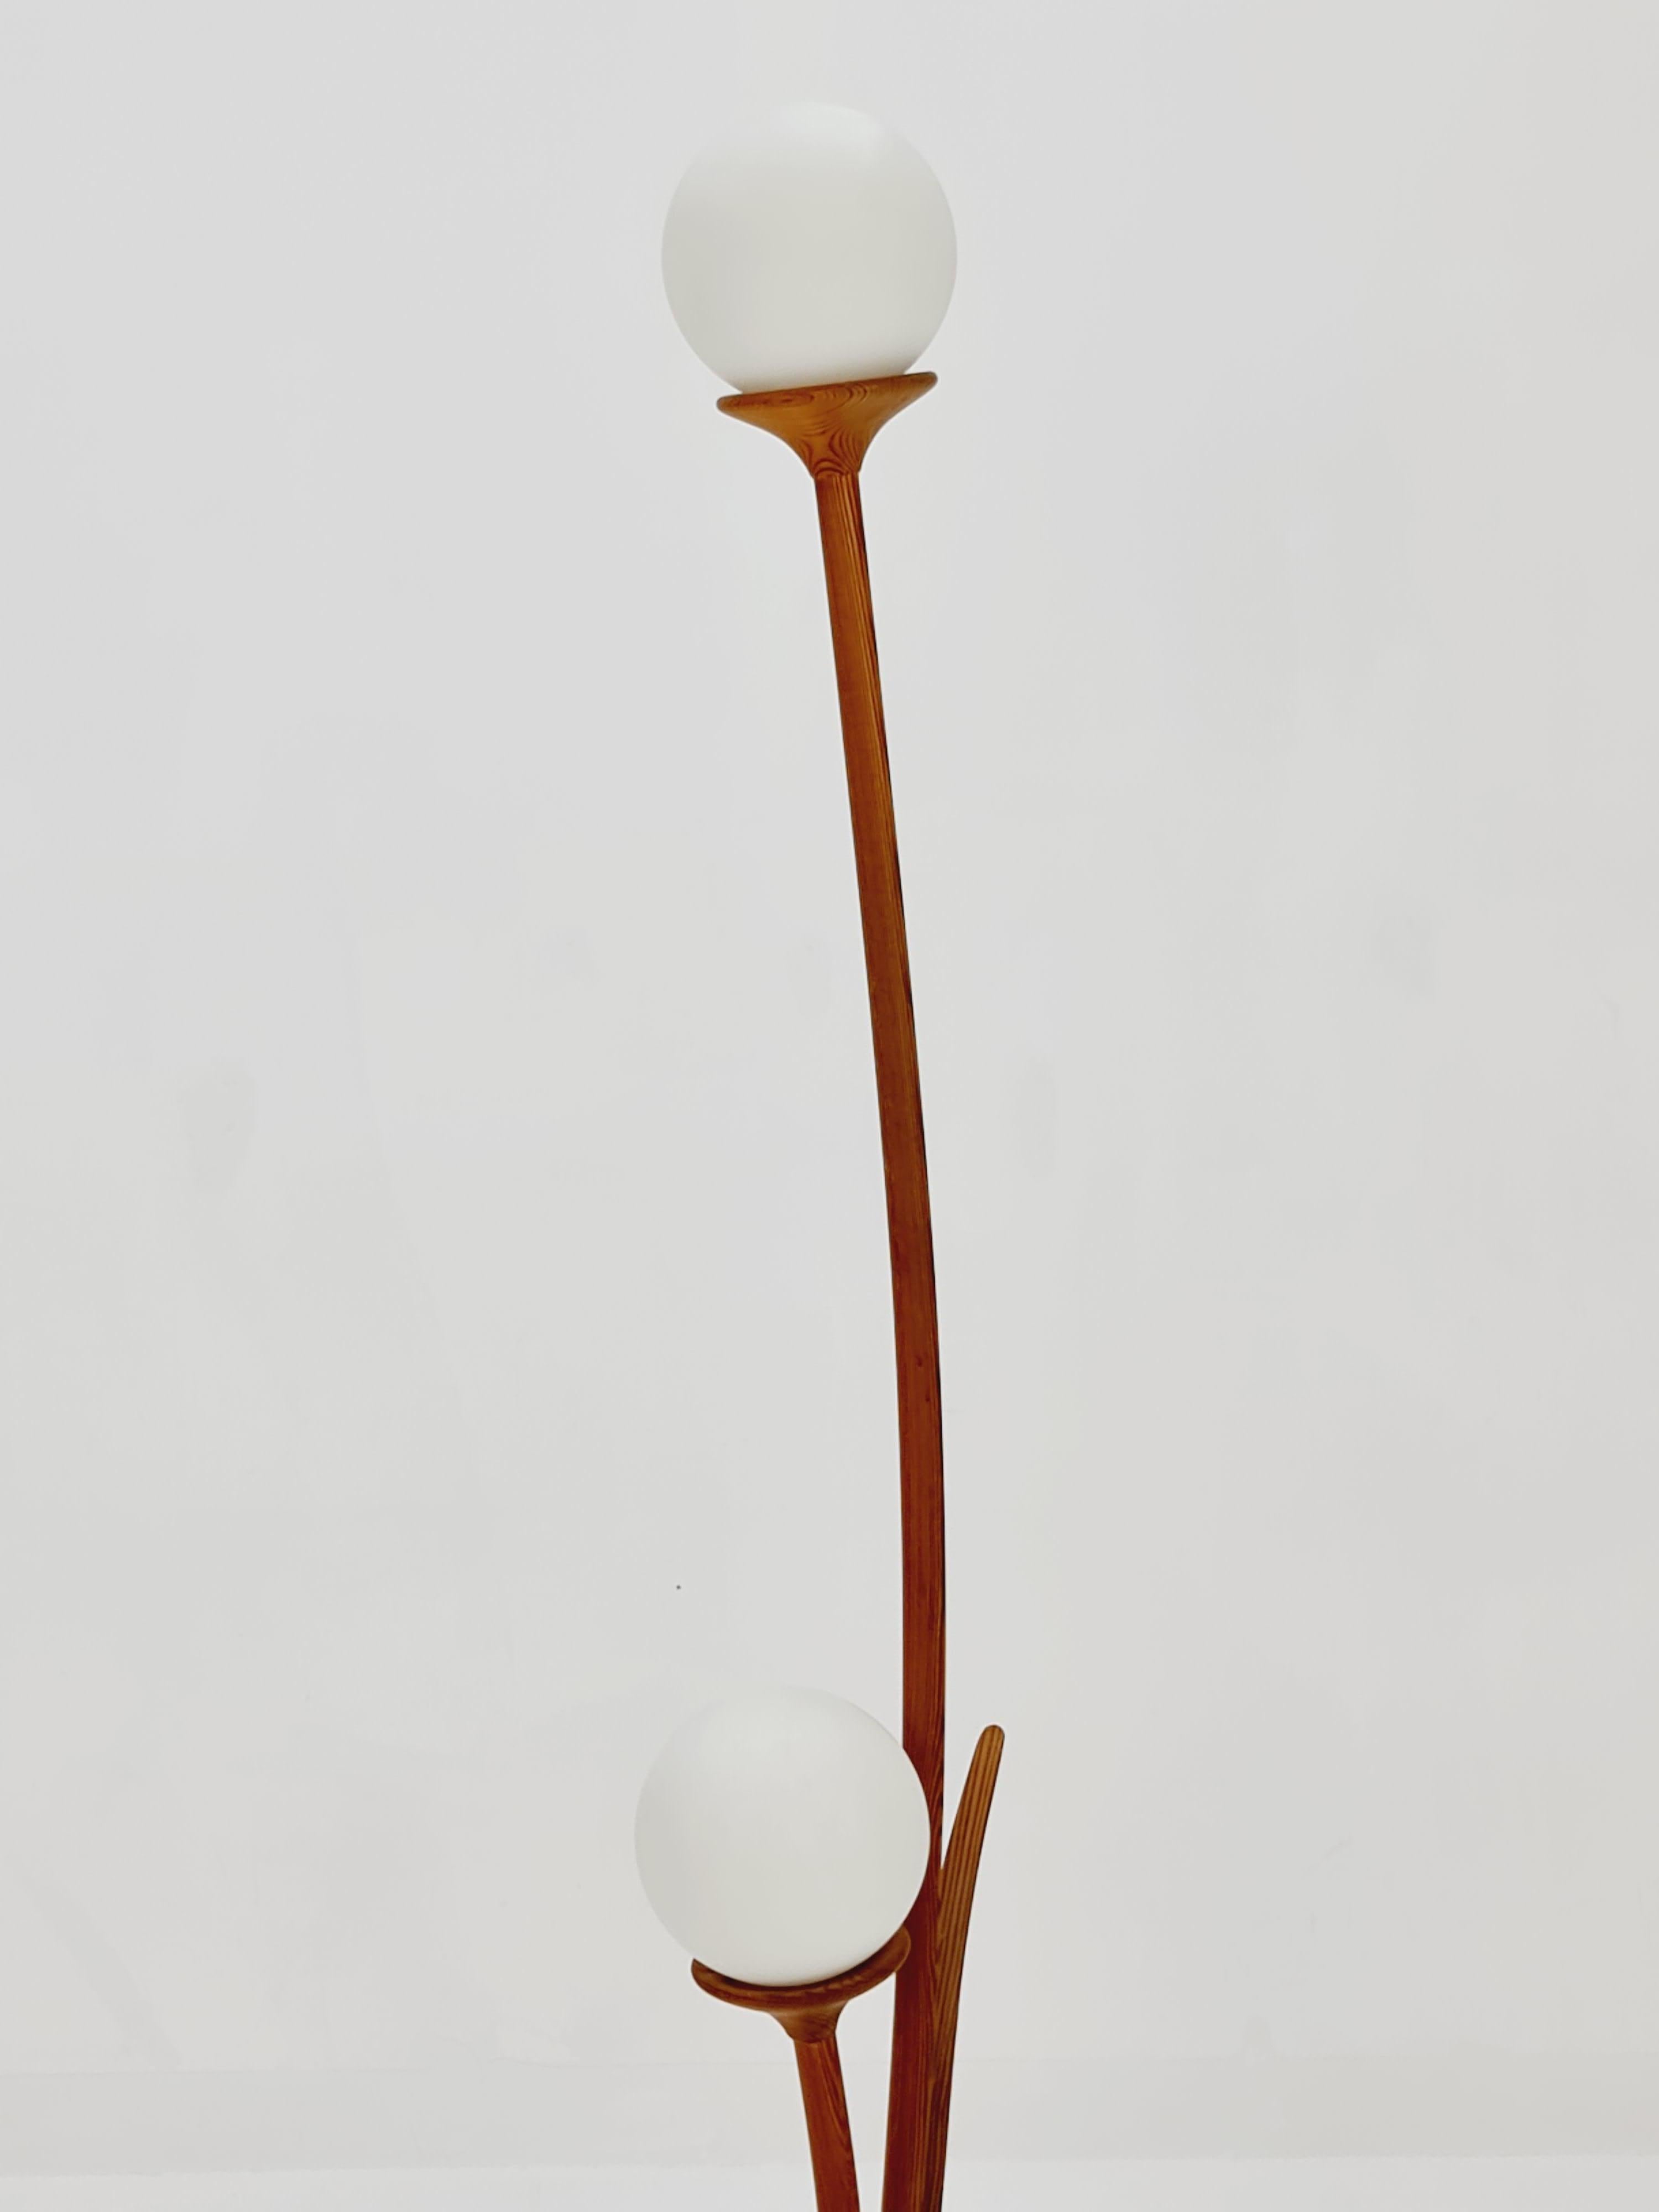 Midcentury Dnaish floor lamp By Domous , 1970s In Good Condition For Sale In Gaggenau, DE